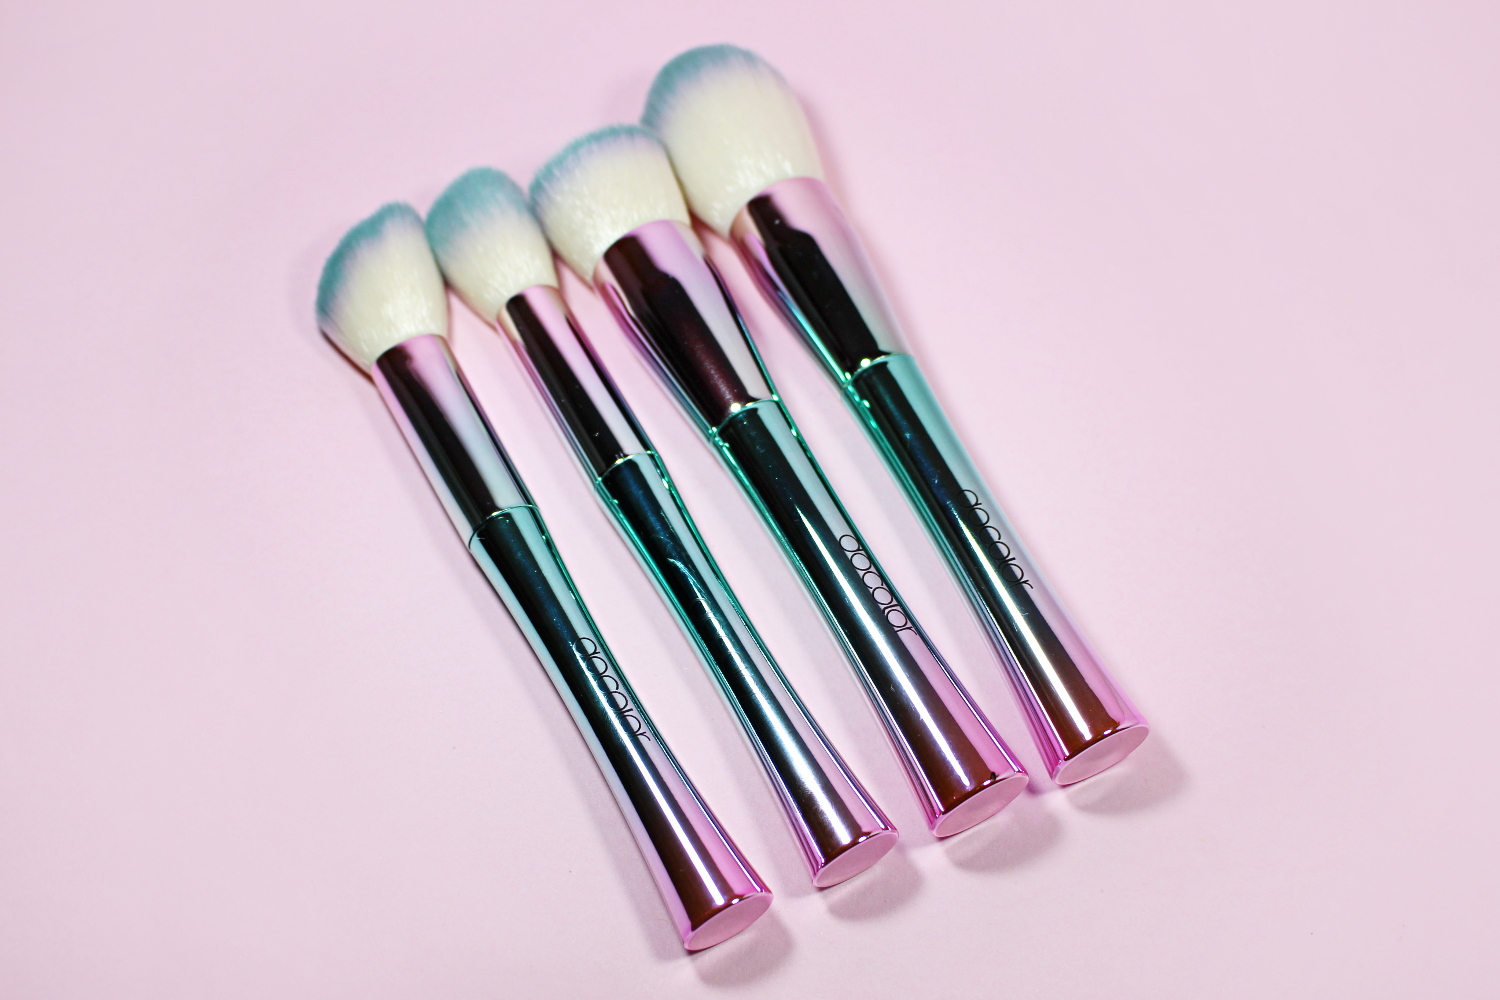 close-up of bright, iridescent makeup brushes on an eastehtic pink background